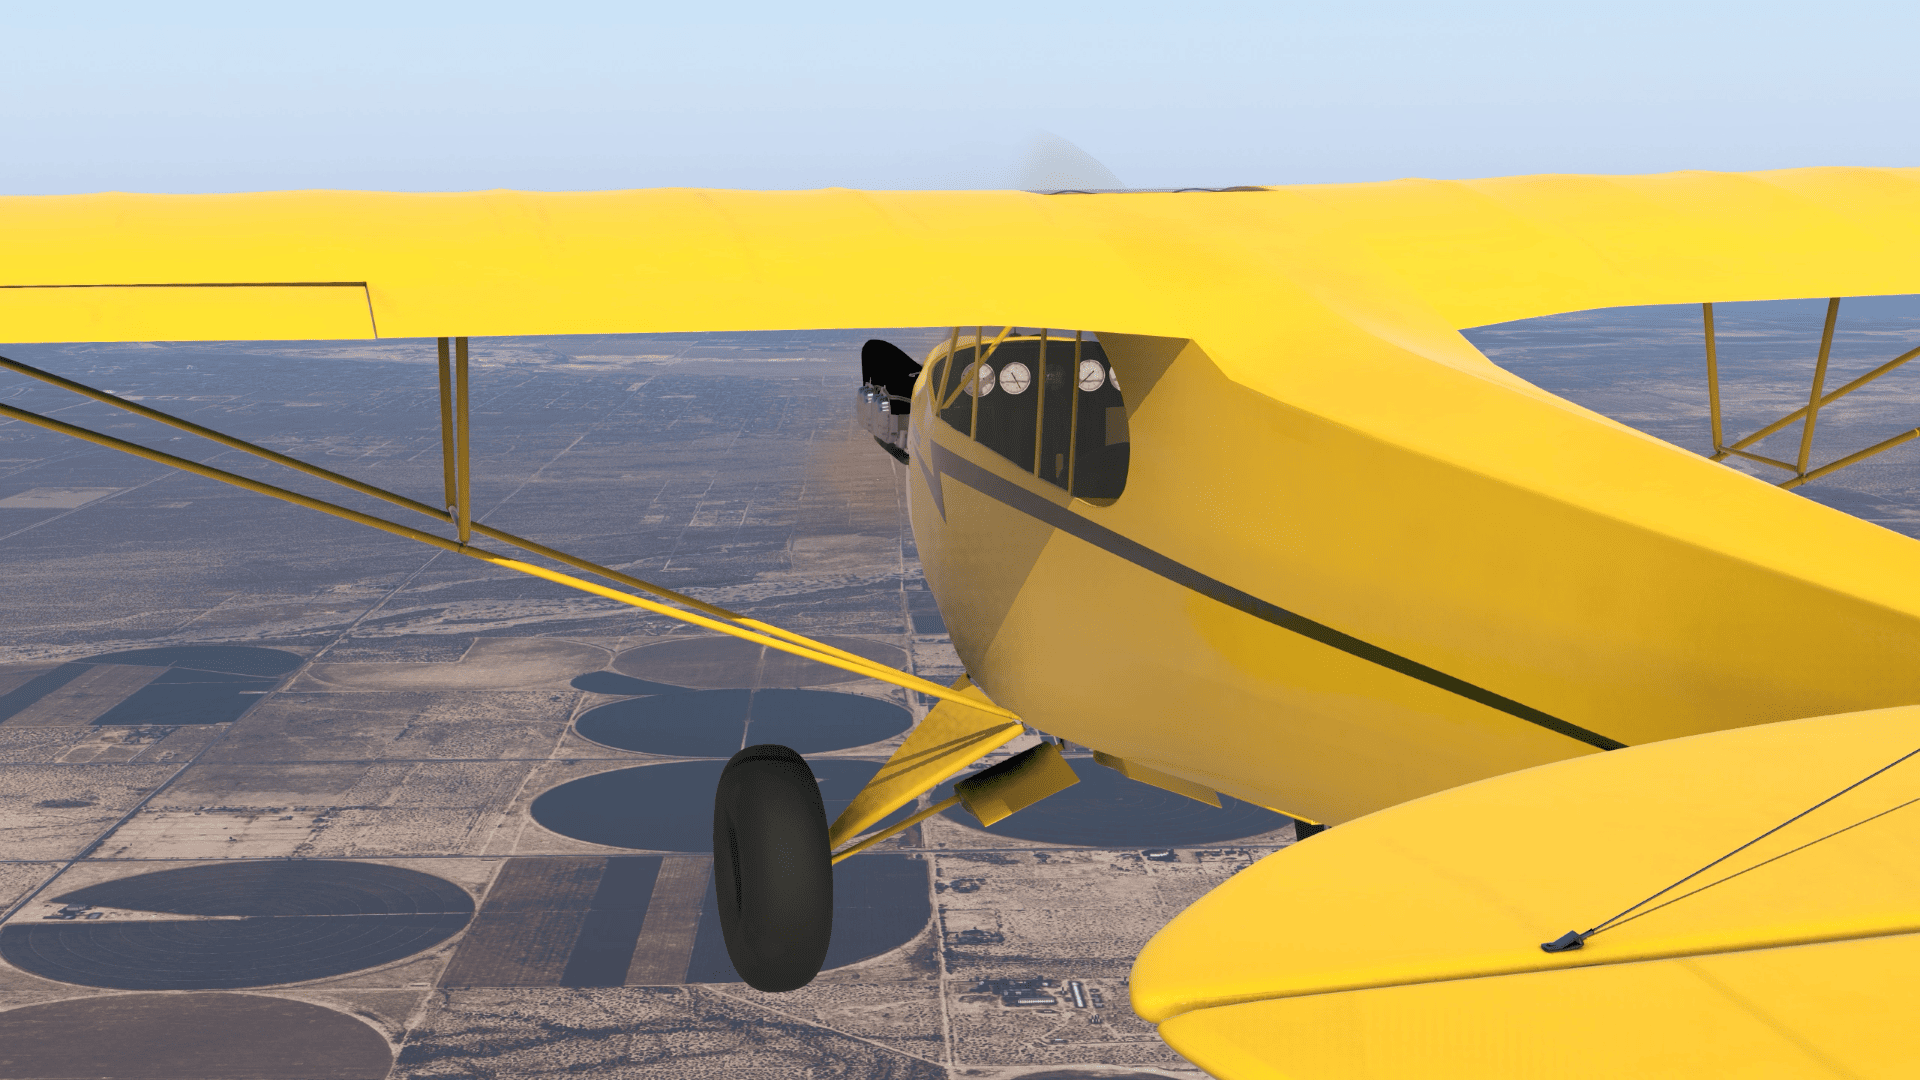 SimSolutions Releases J3 Cub for X-Plane - SimSolutions, X-Plane